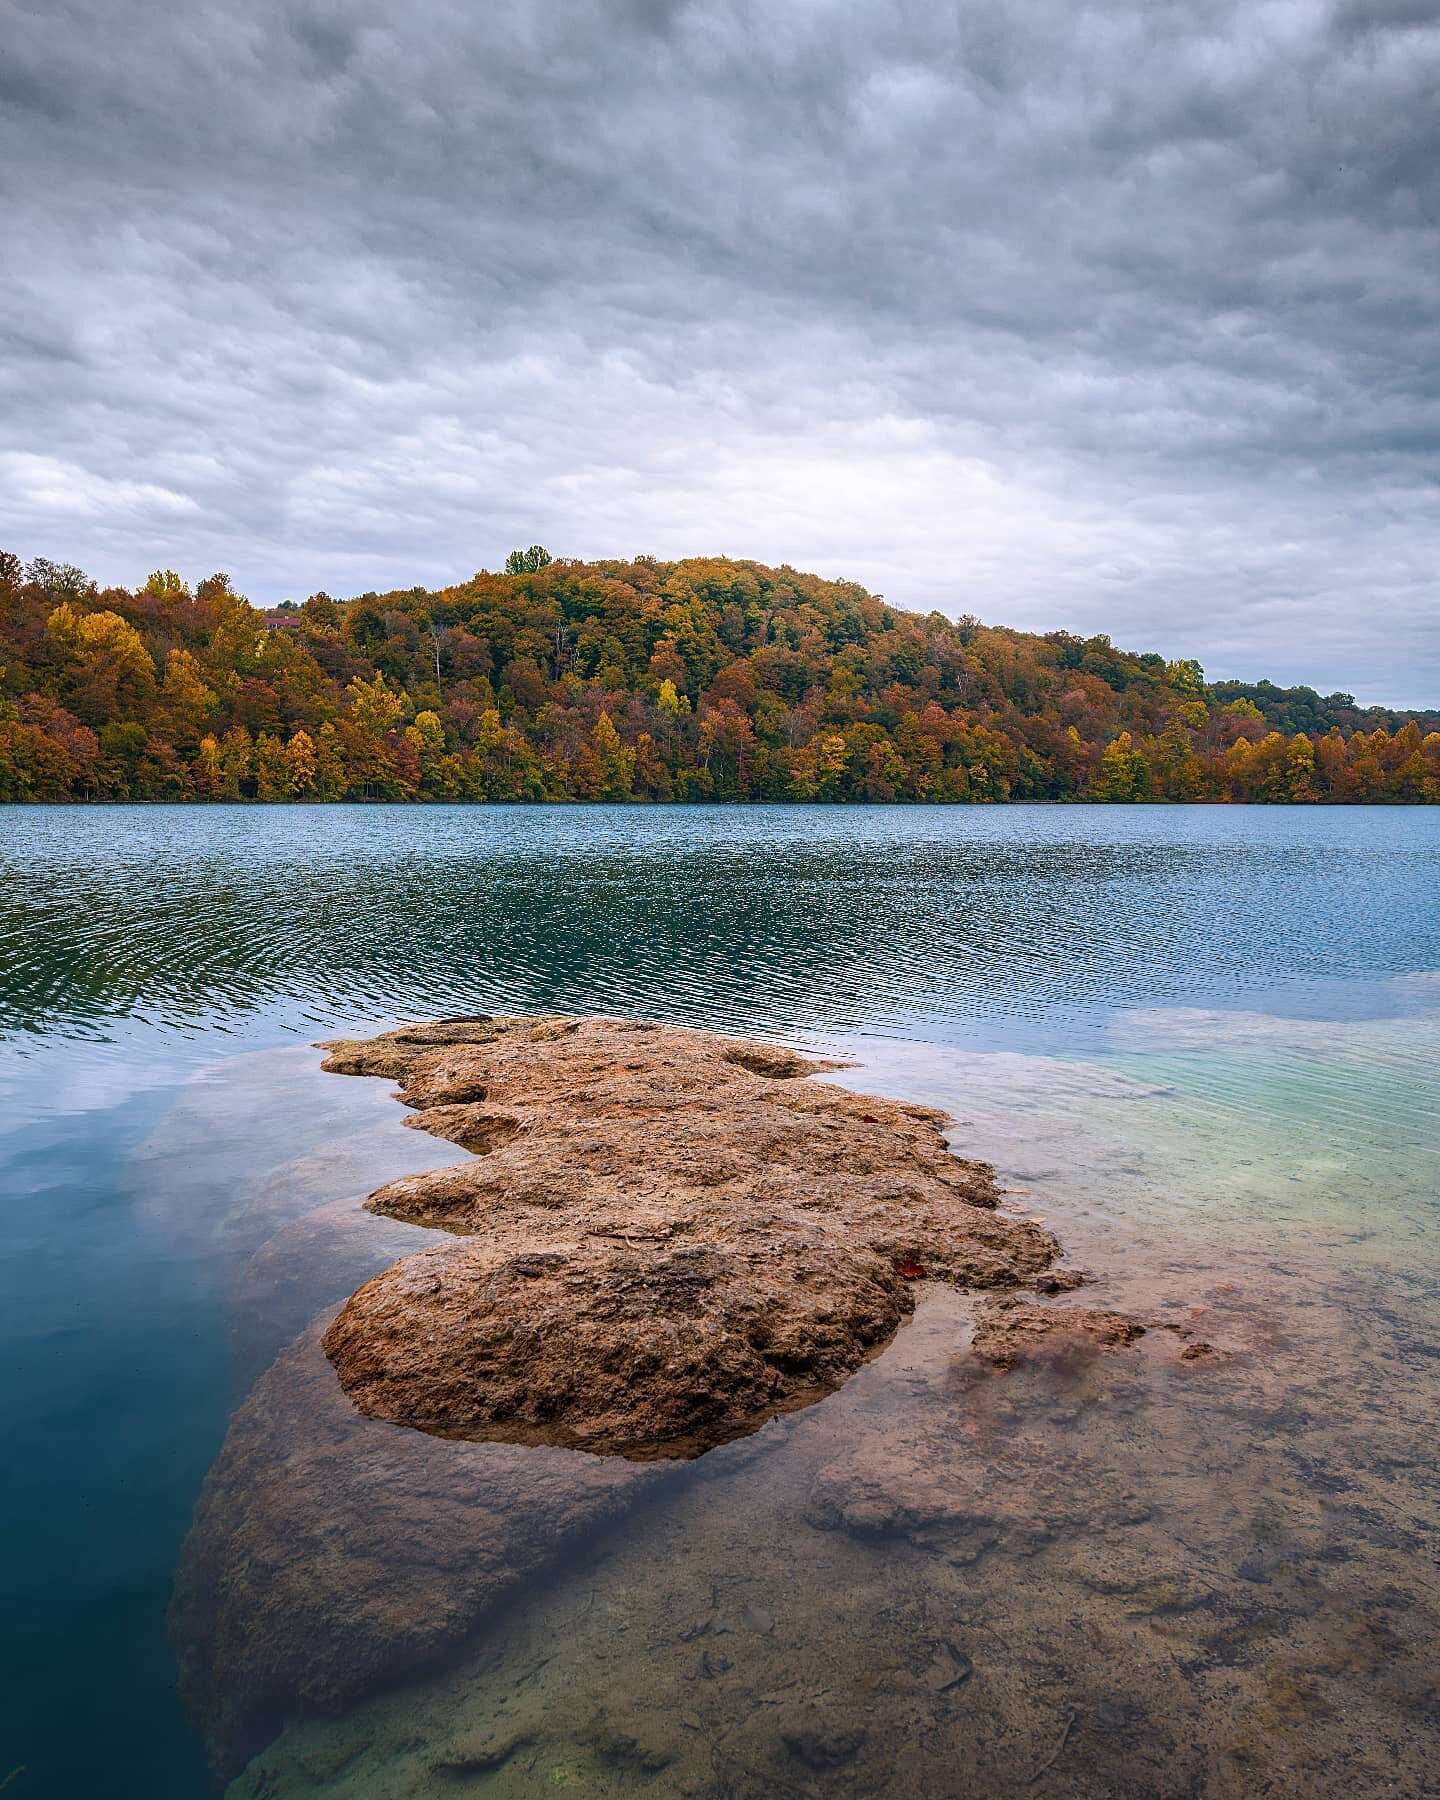 &quot;Venture&quot;
.
Another image from a few weeks ago, catching some early autumn color at Green Lakes, along with some super moody skies!
.
==========================================
.
💻: www.griffinbarnett.photography
.
========================